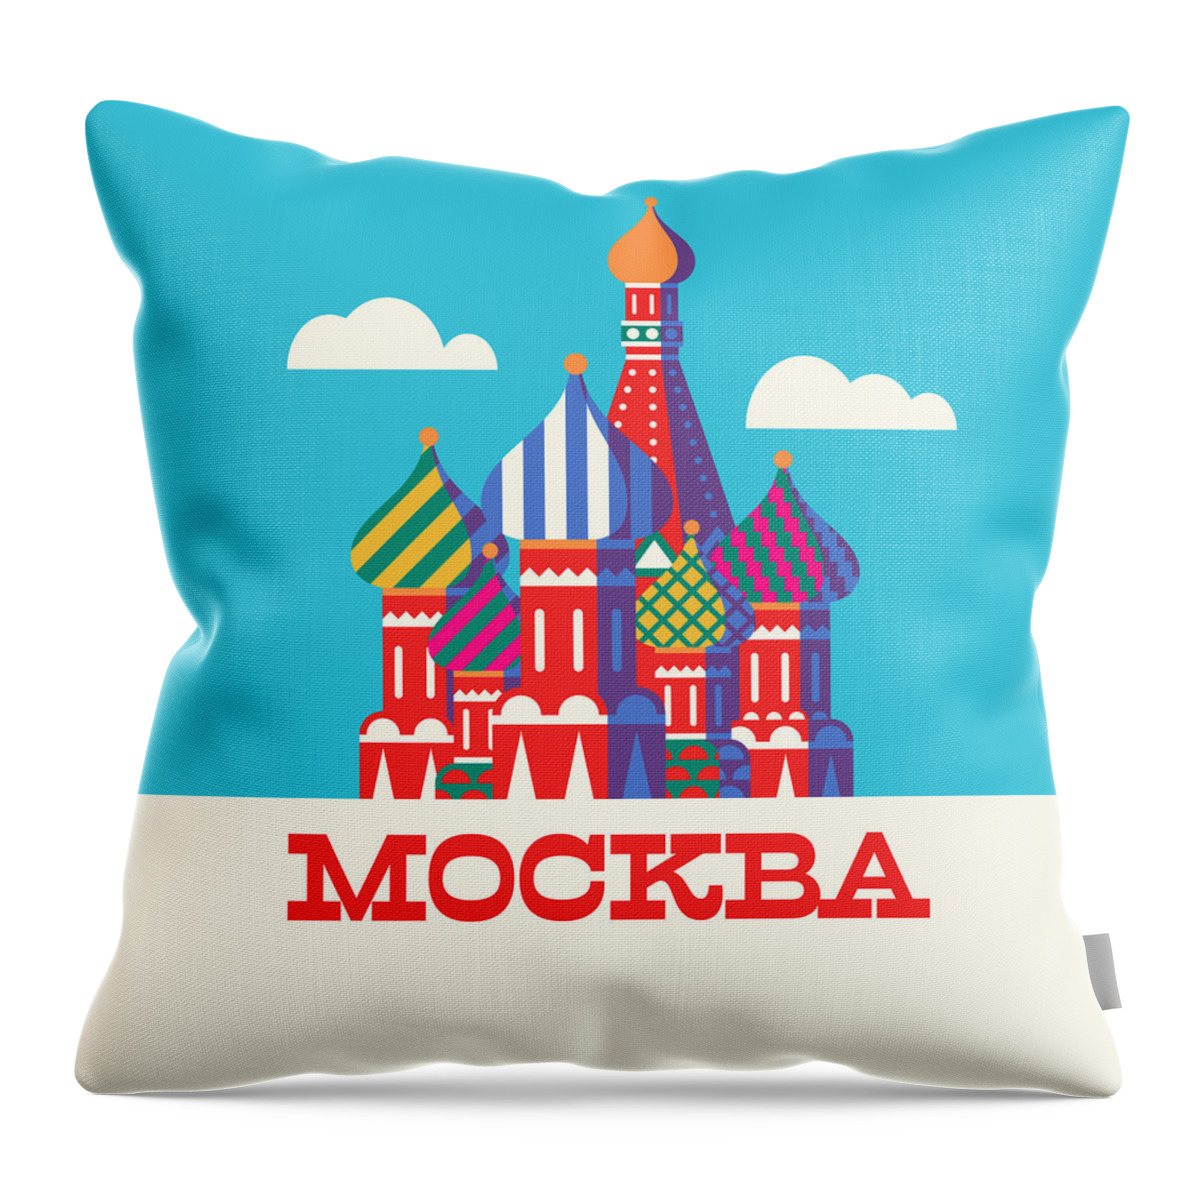 Retro Throw Pillow featuring the digital art St Basil's Cathedral Russia Tourism Moscow - Cyan by Organic Synthesis